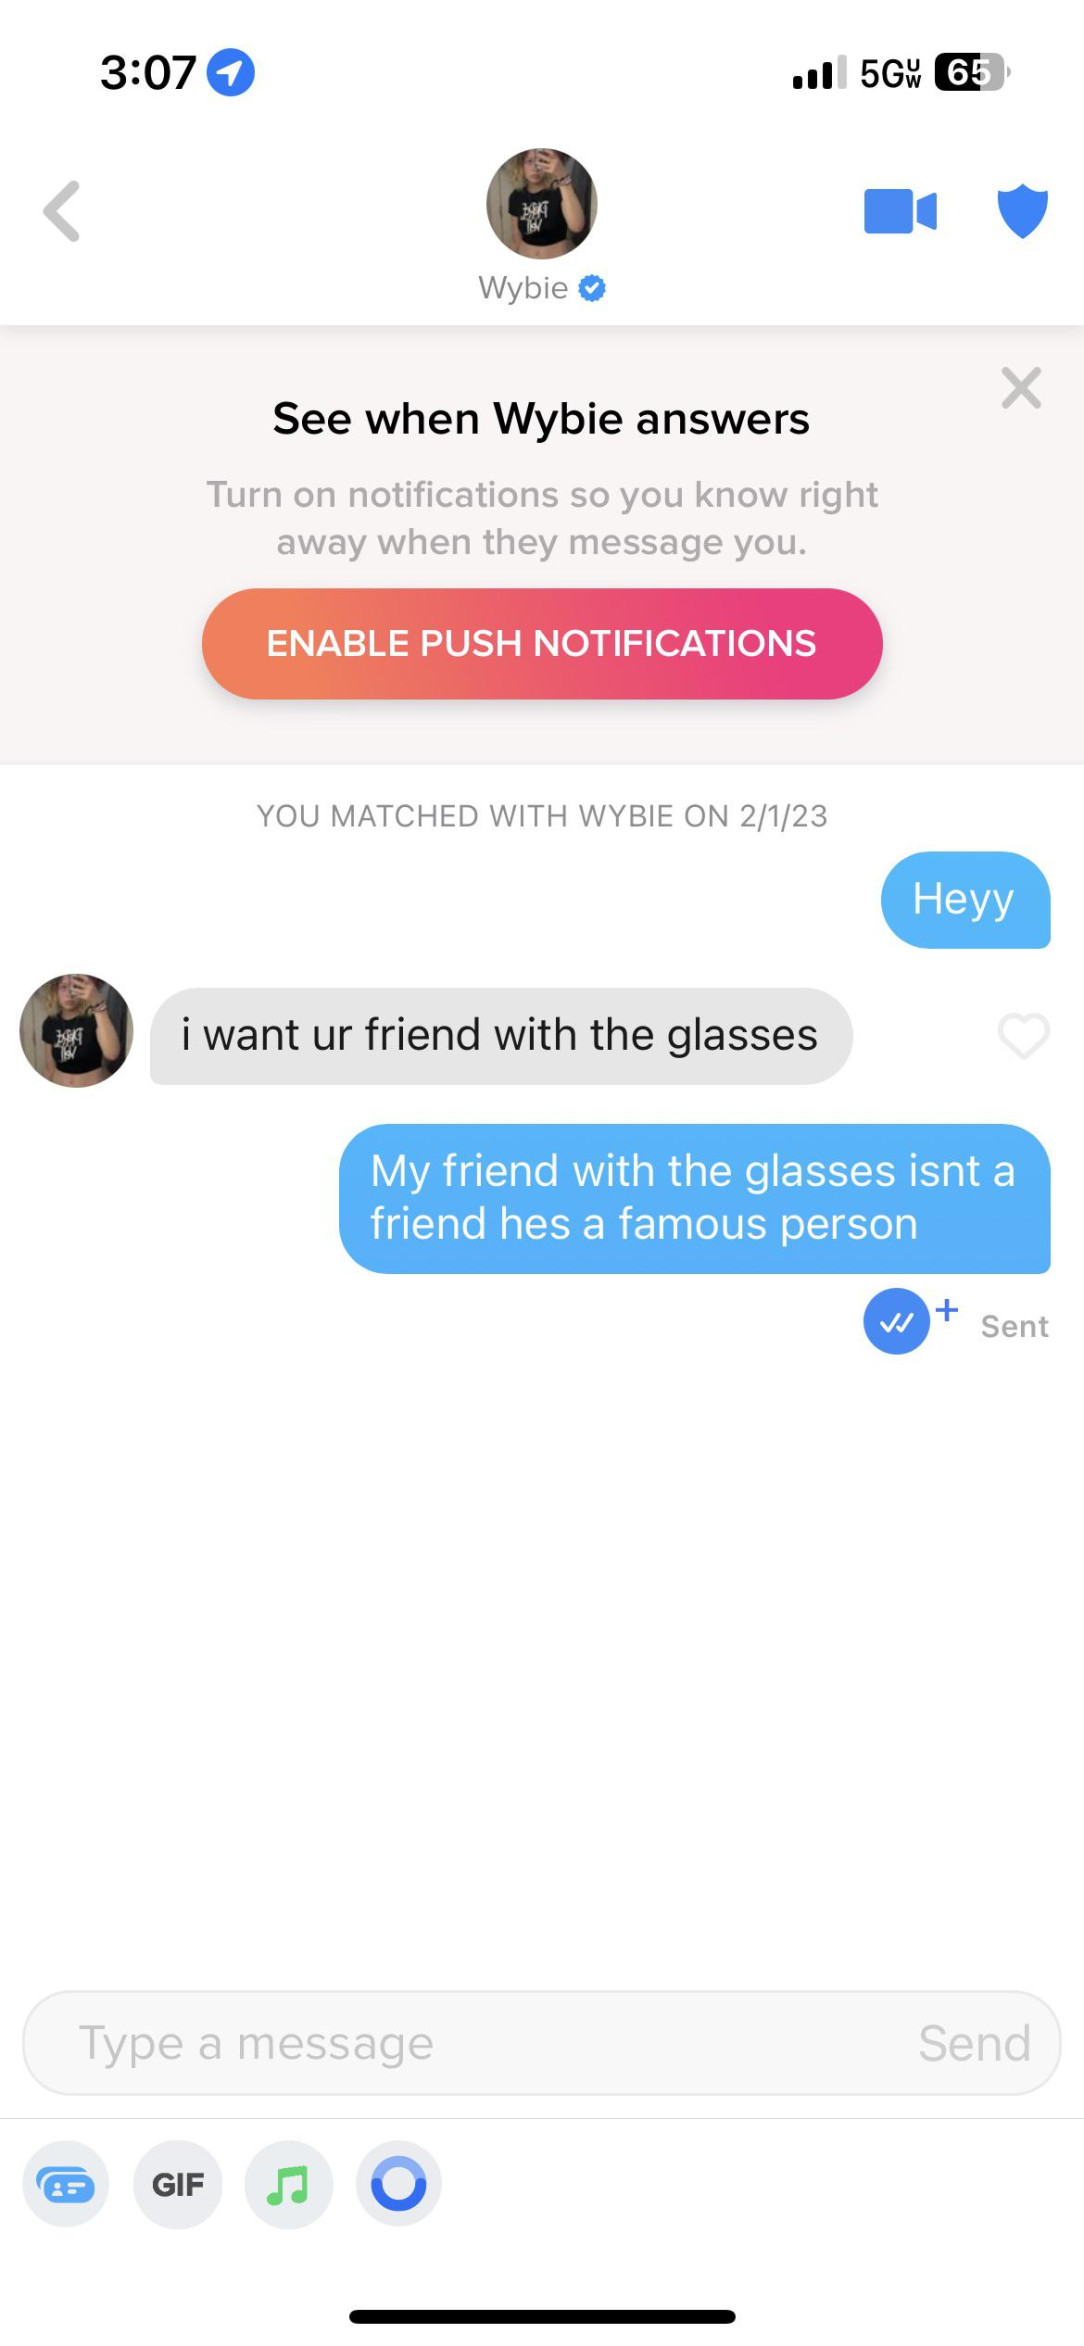 Who tf does this shit, idk anyone who if you match with them will set you up with their friend thats some weird shit